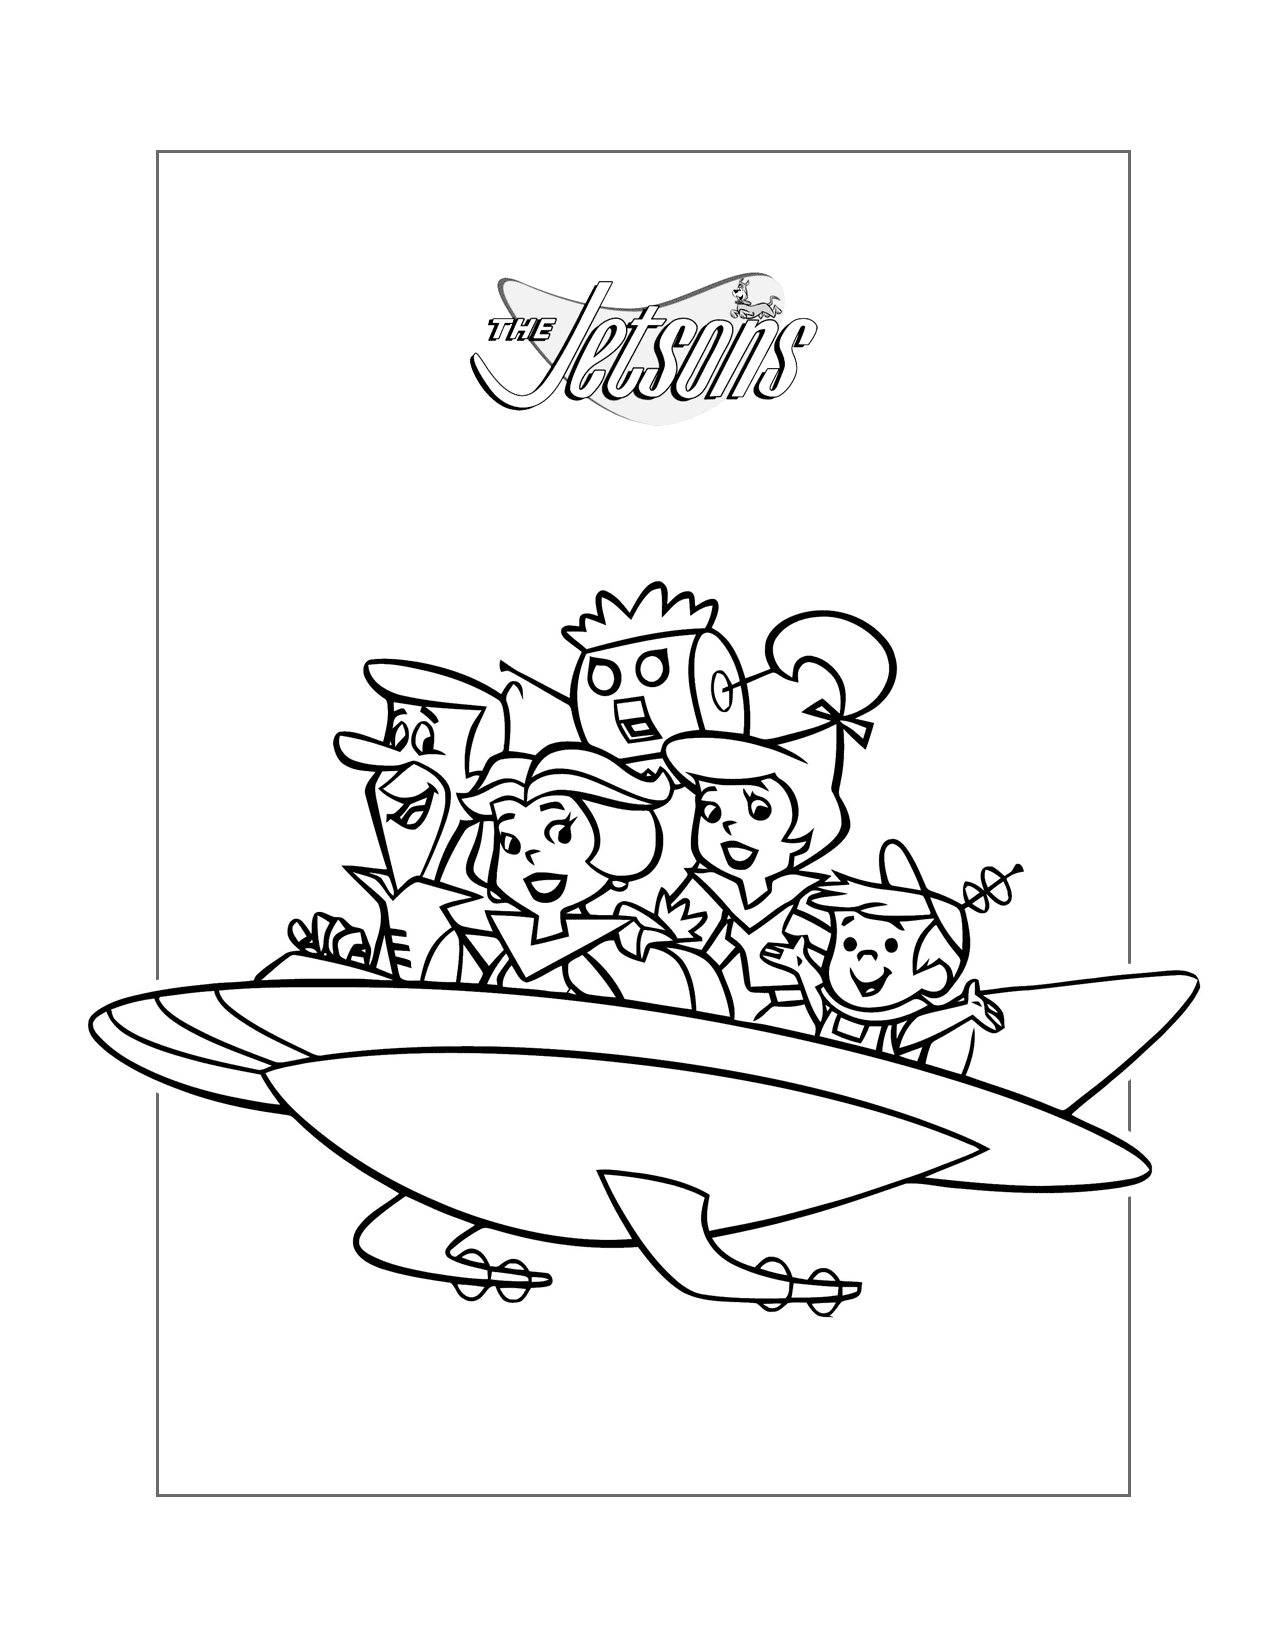 Jetsons Coloring Page